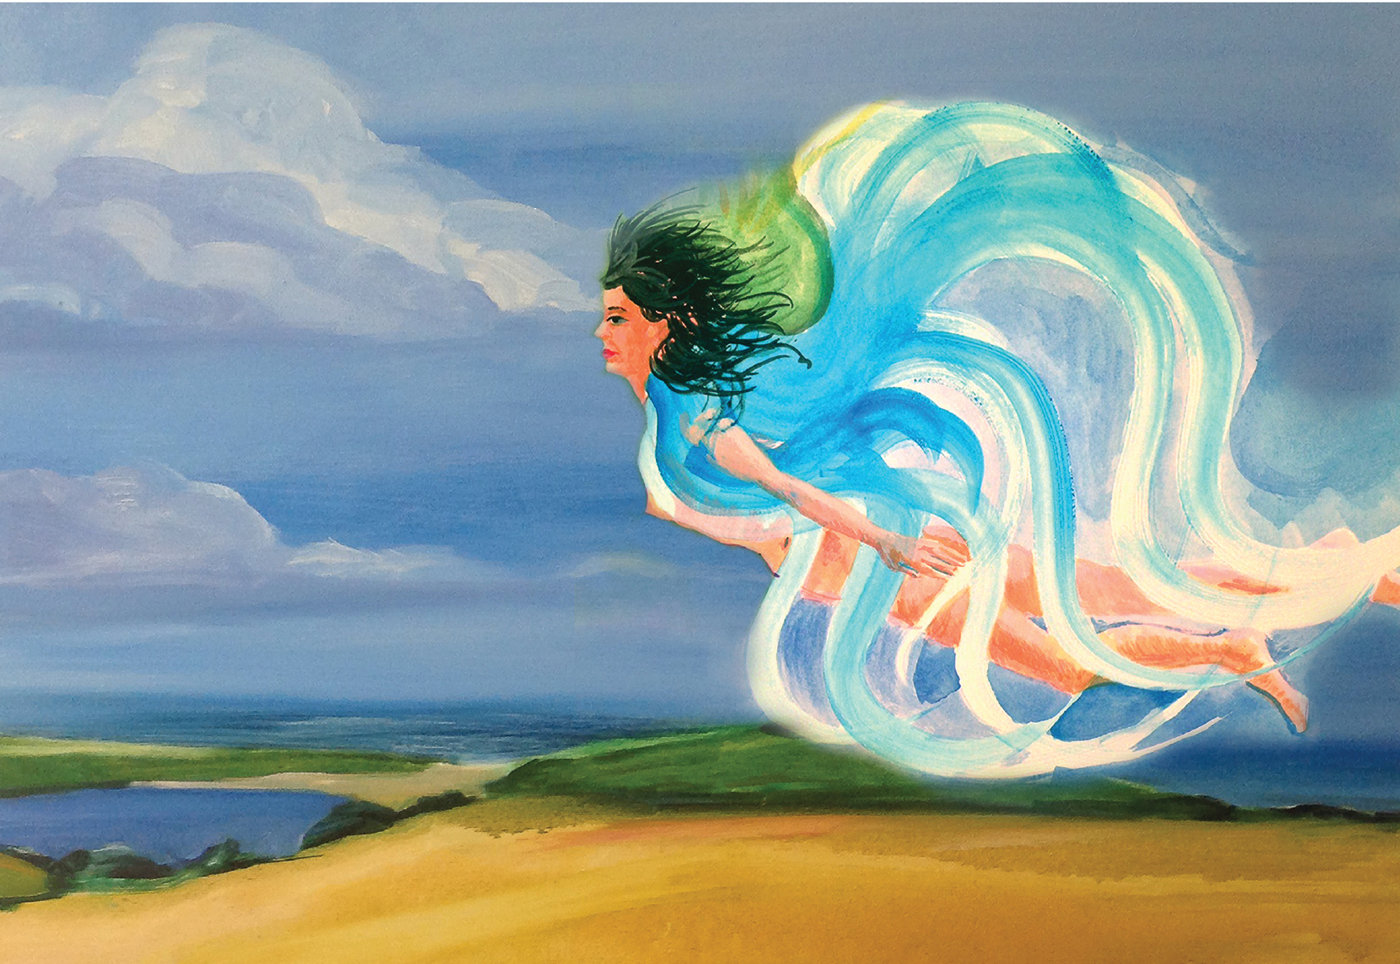 ‘EARTH’ IMAGES: “Lucy Flying Over” is one of several landscape oil paintings by renowned artist Susan Nichter, whose work will be on display until mid-October at the Community College of Rhode Island’s Knight Campus Art Gallery.